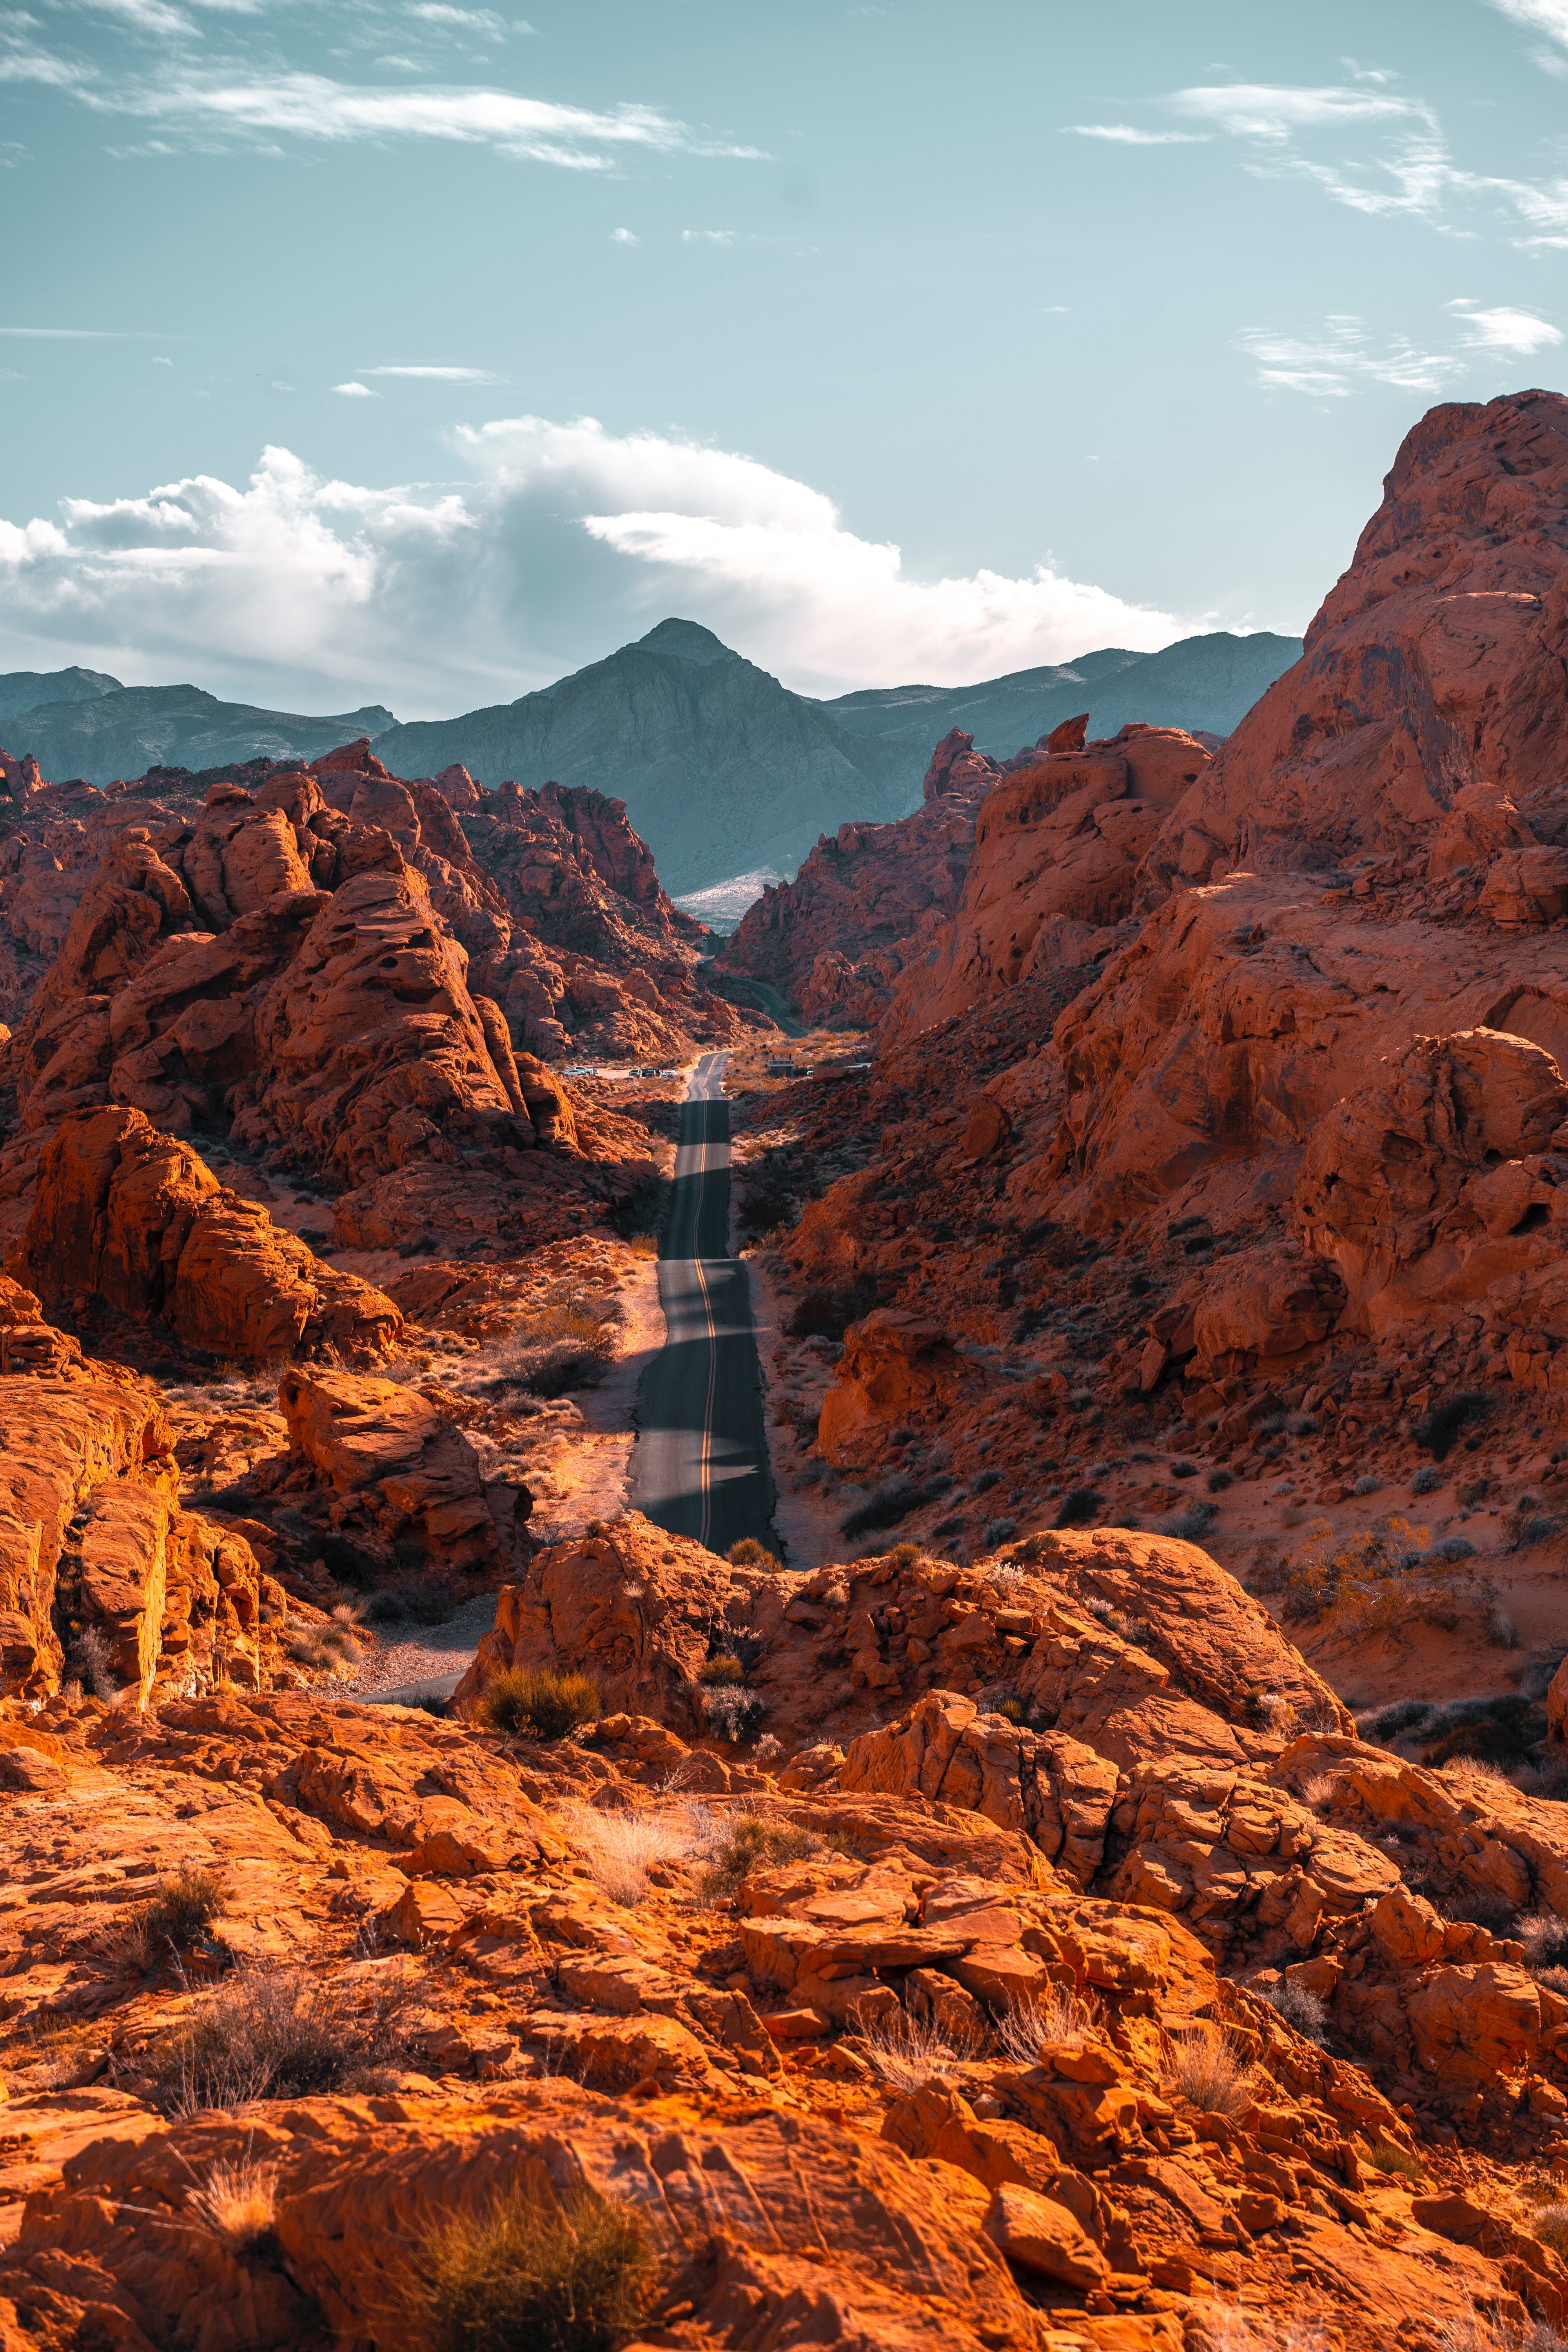 Widescreen image road, view from above, nature, rocks